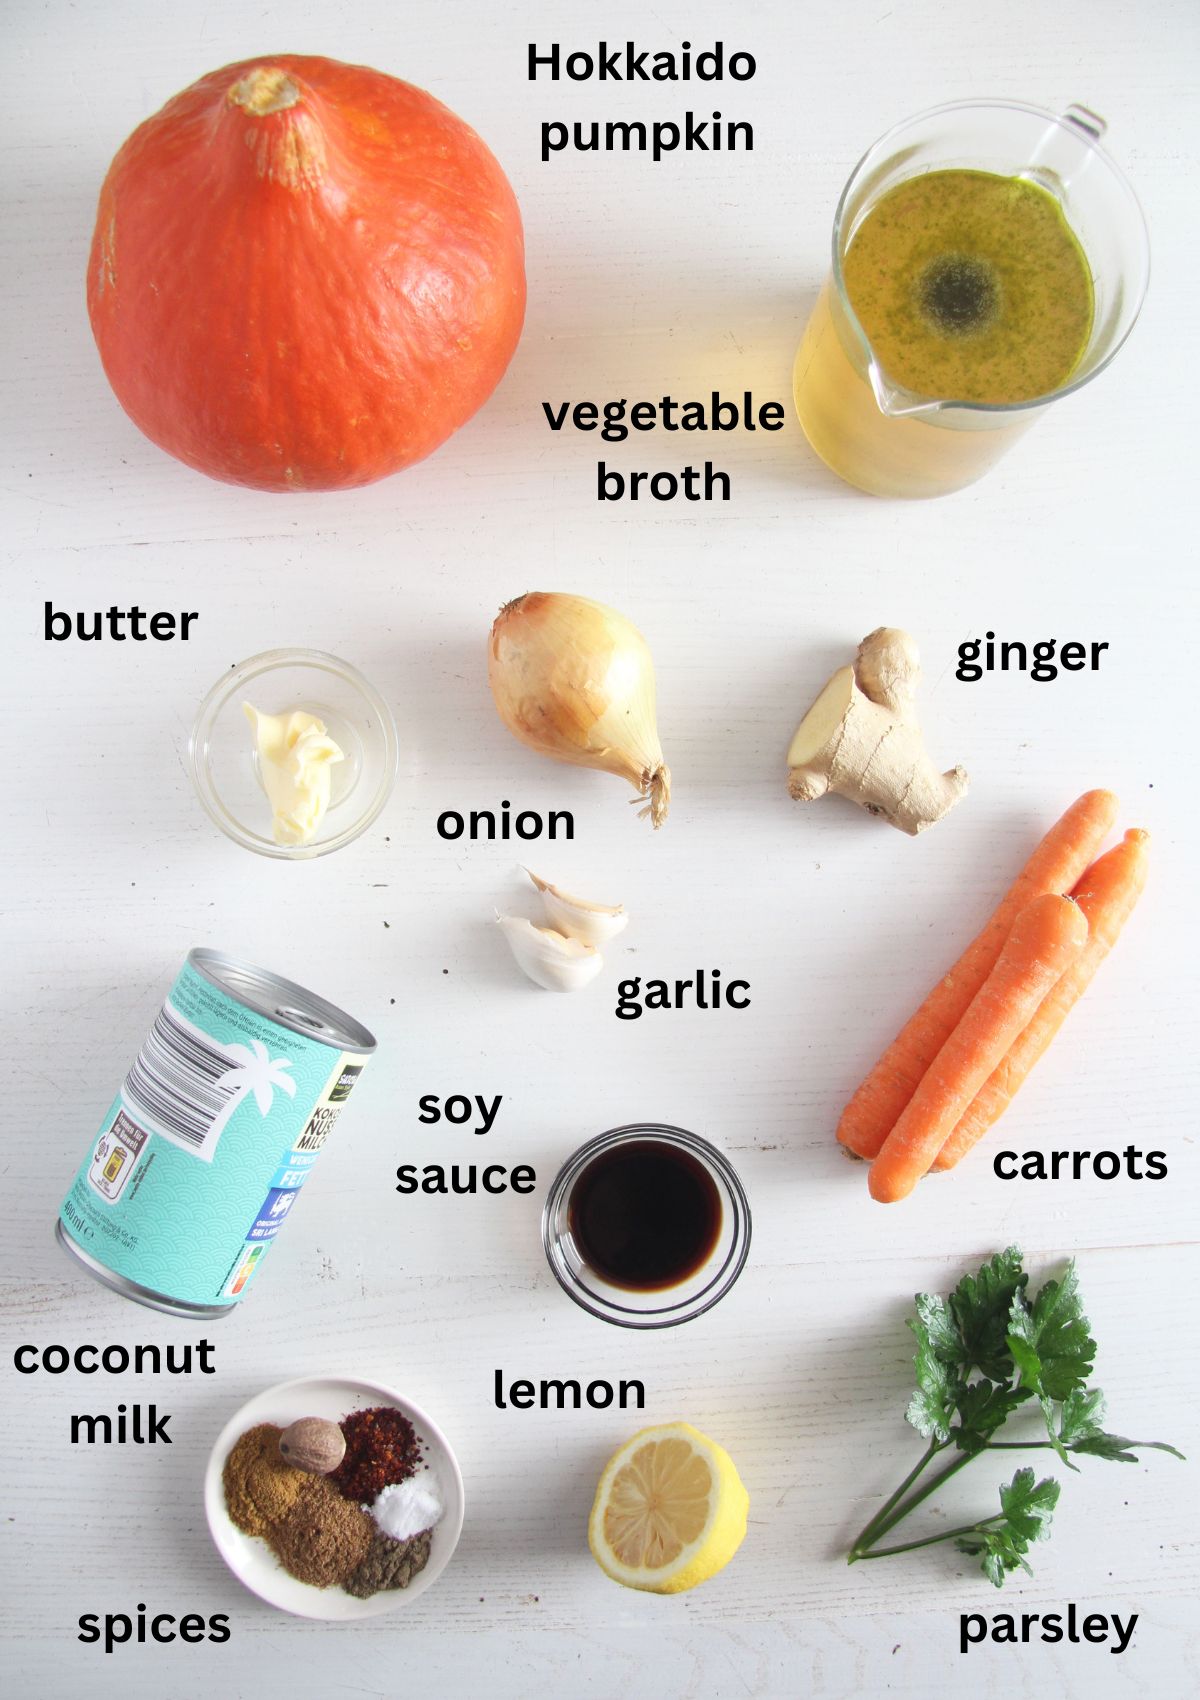 listed ingredients for making soup with carrots, coconut milk and carrots.